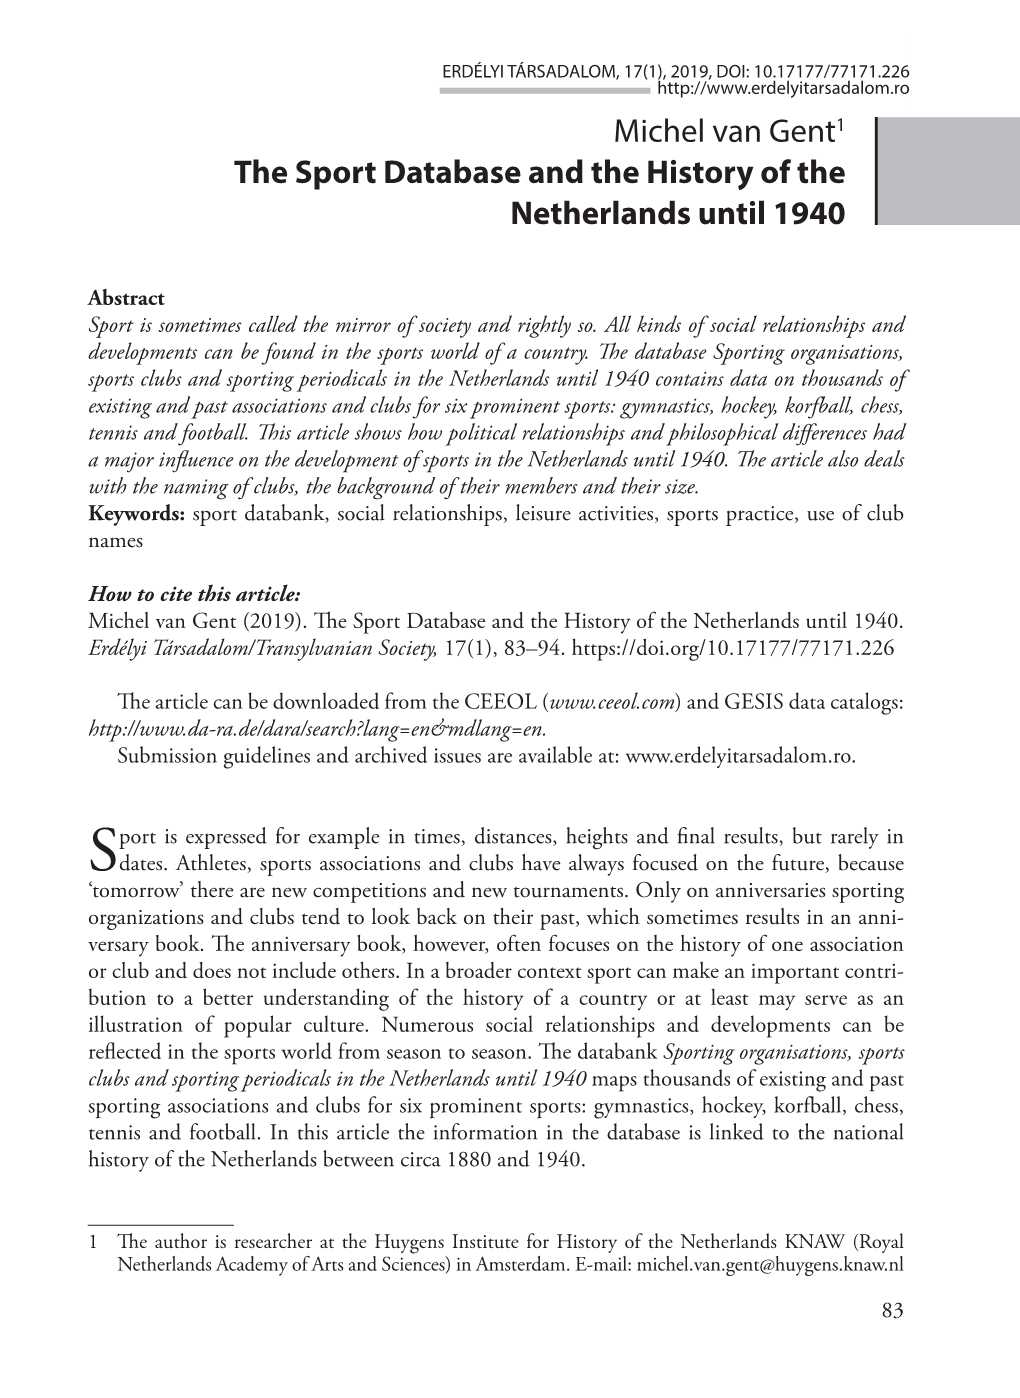 Michel Van Gent1 the Sport Database and the History of the Netherlands Until 1940